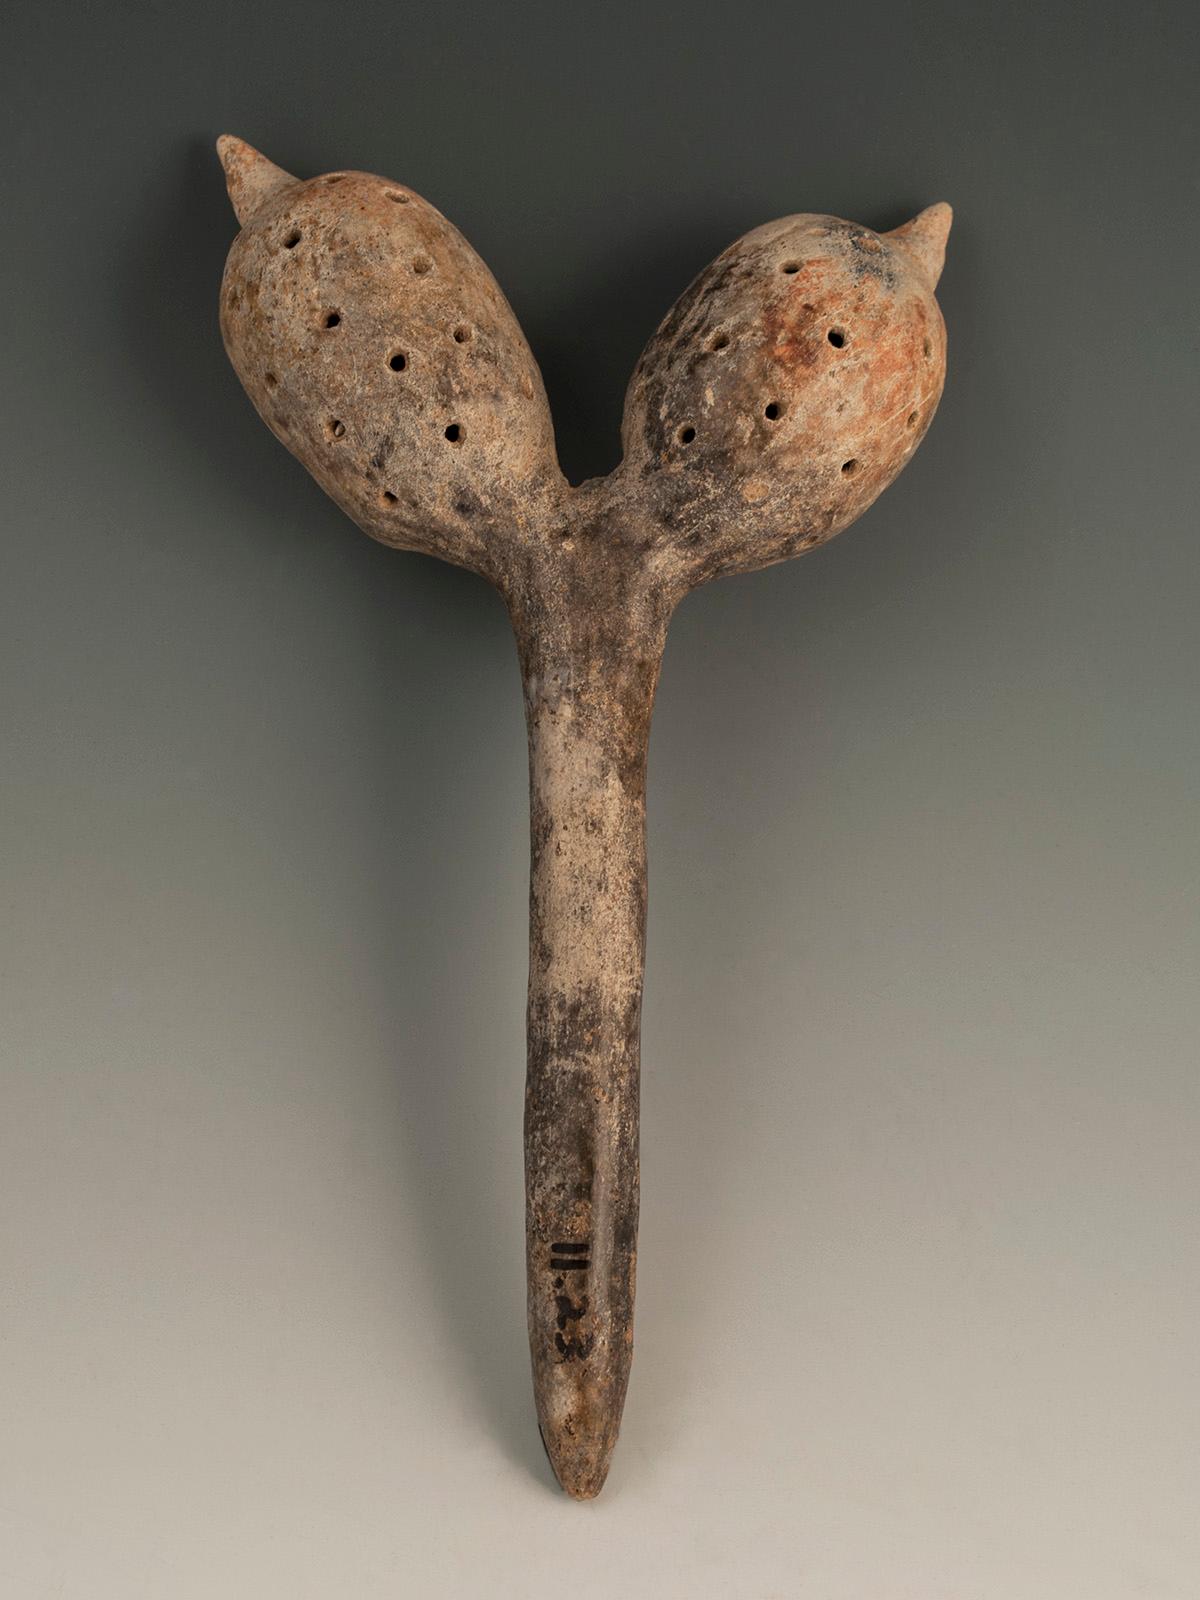 Circa 100 B.C. - 250 A.D. Terracotta rattle, Colima, West Mexico.

A forked rattle with a multitude of perforations over the bulbous pod-like bodies, having pellets inside for sound. No damage or restoration. Collection #11-23 can be seen on verso